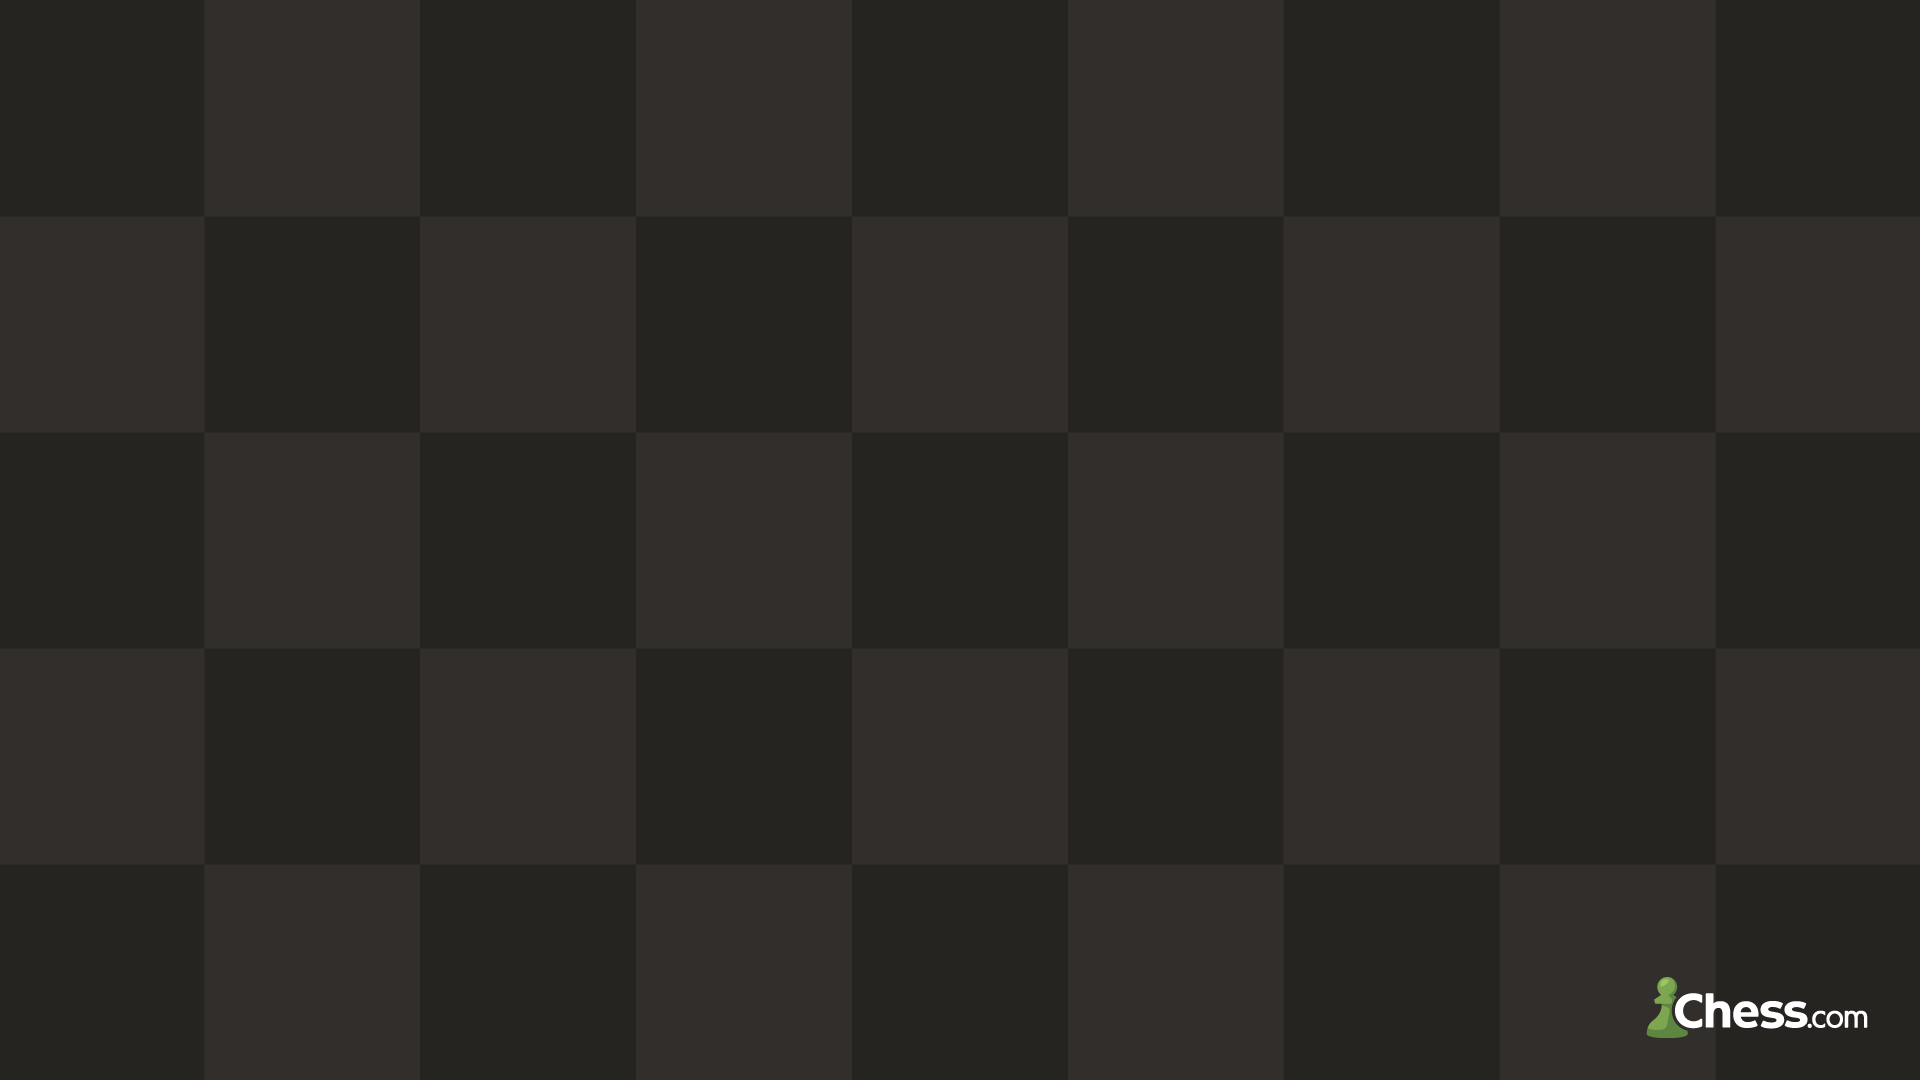 Chess Background & Wallpaper (Free to Download) 